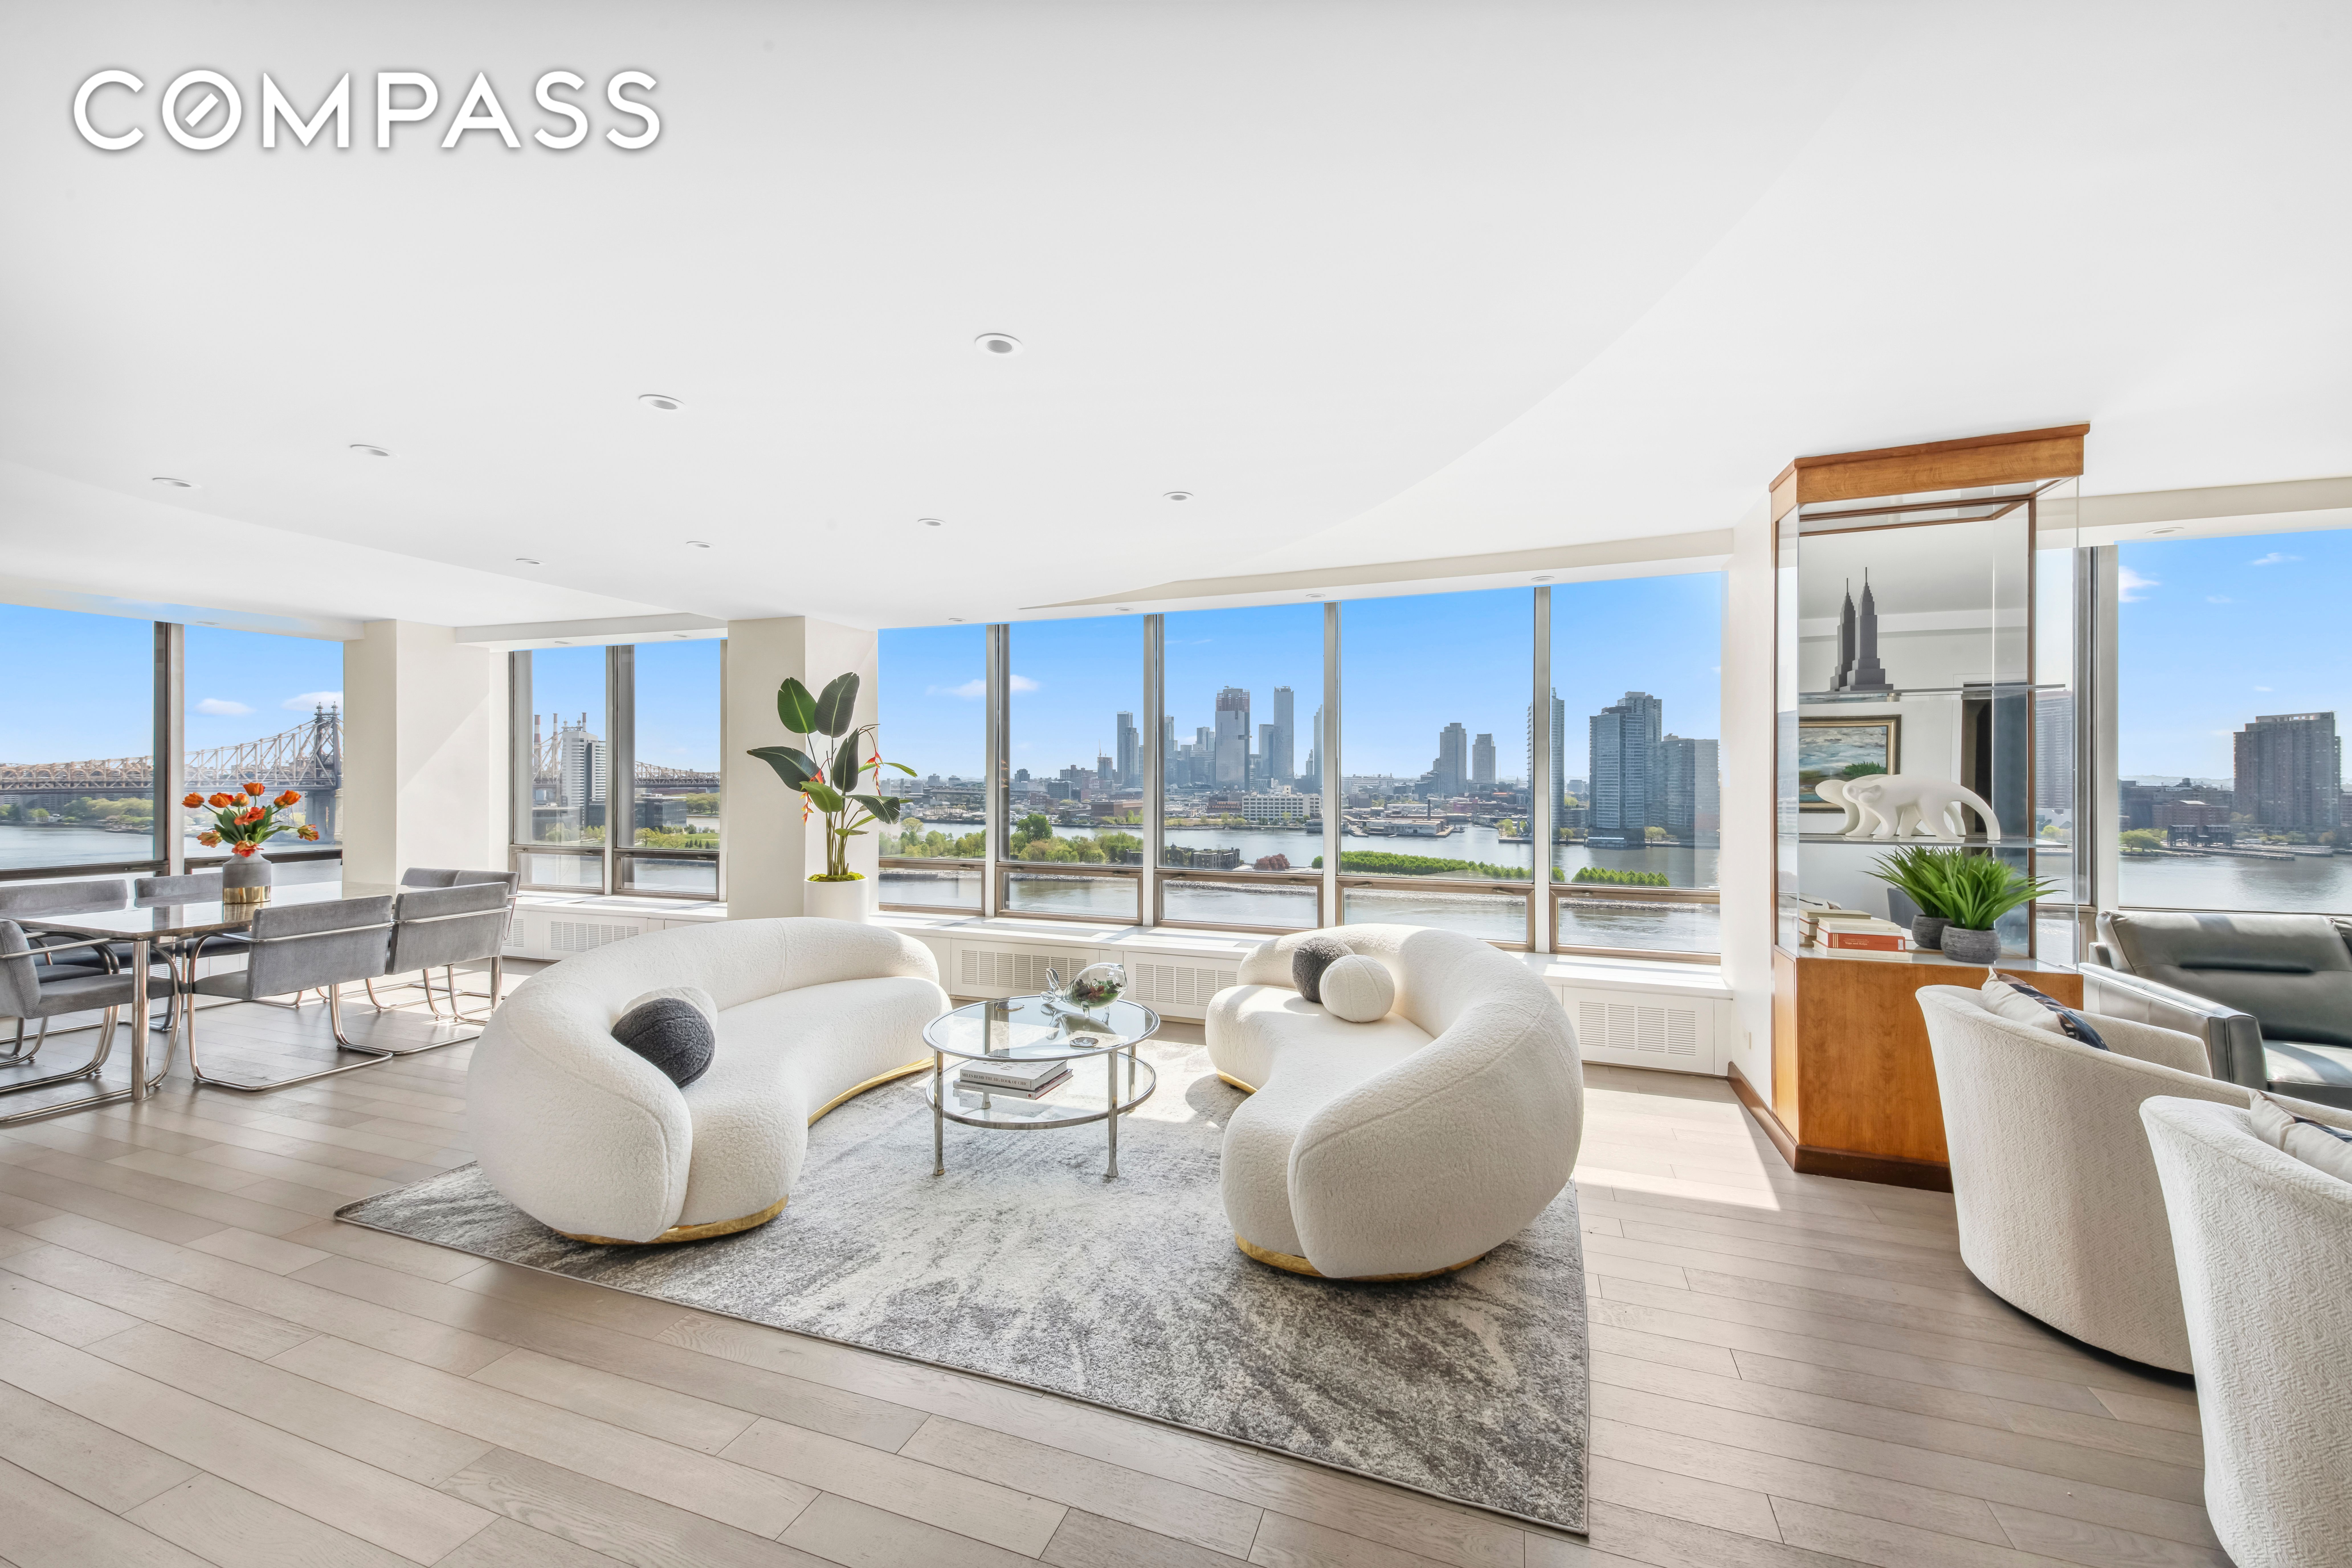 870 United Nations Plaza 15E, Midtown East, Midtown East, NYC - 4 Bedrooms  
4 Bathrooms  
10 Rooms - 